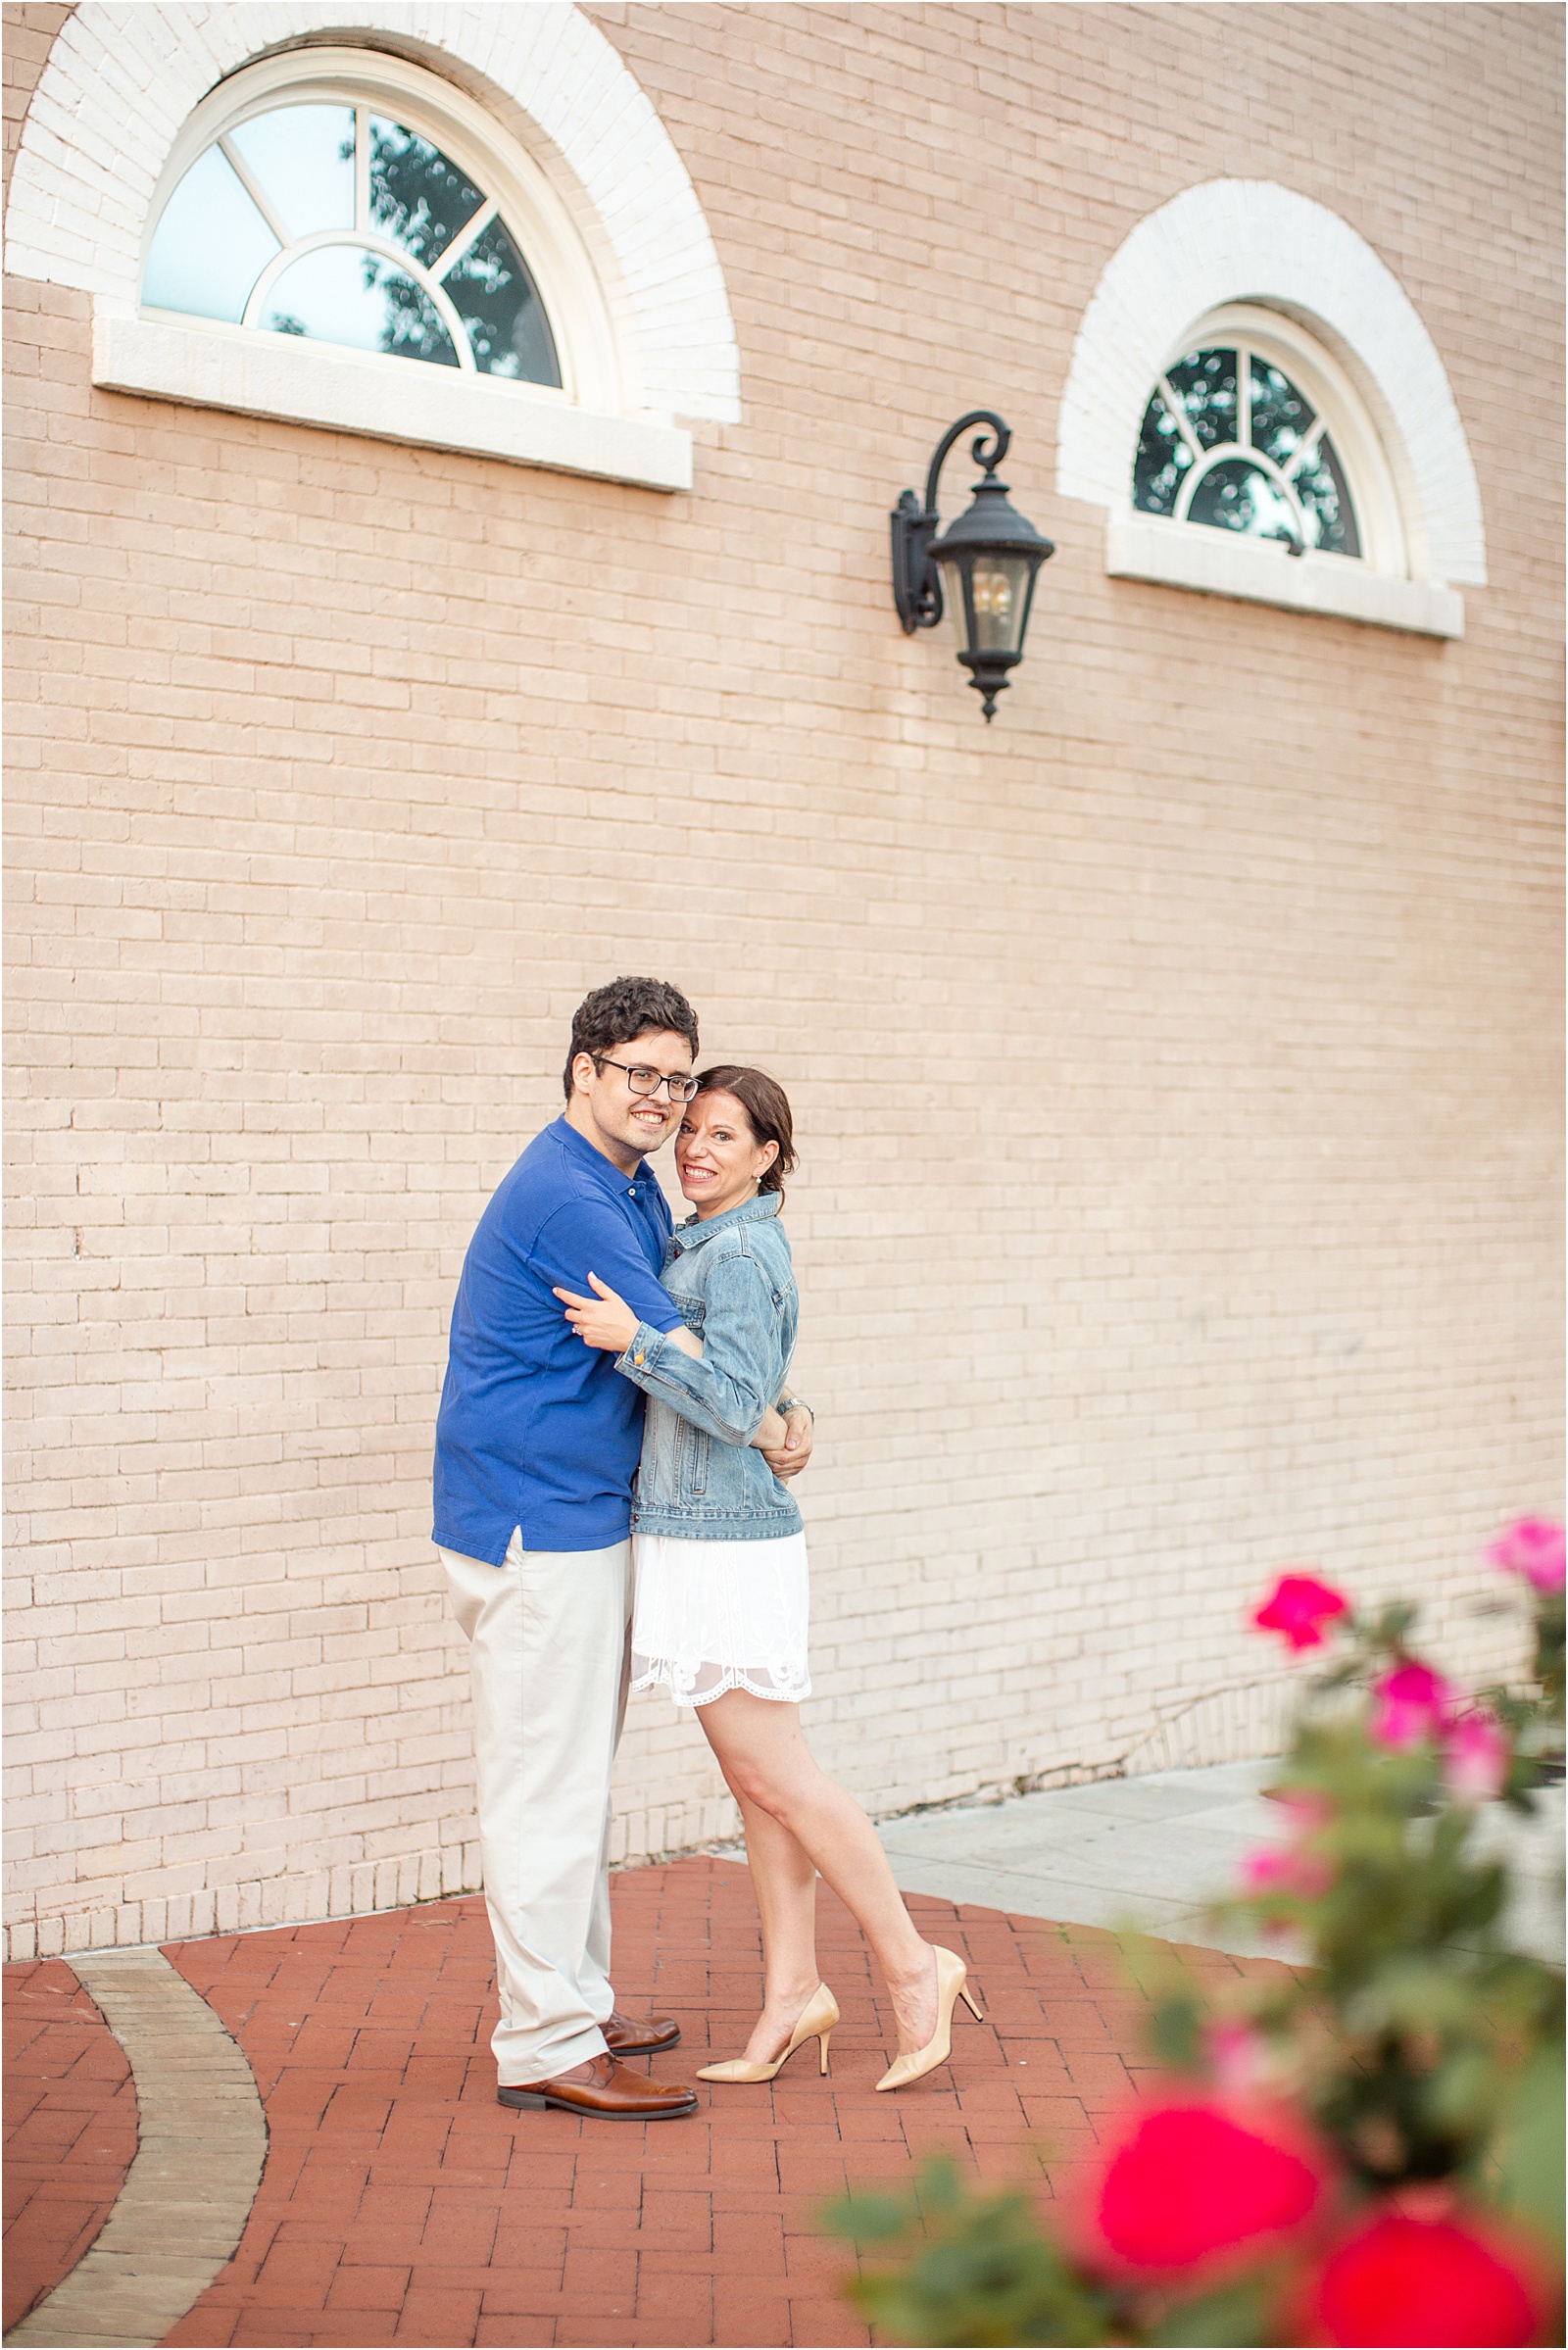 Historic downtown Anderson building with engaged couple